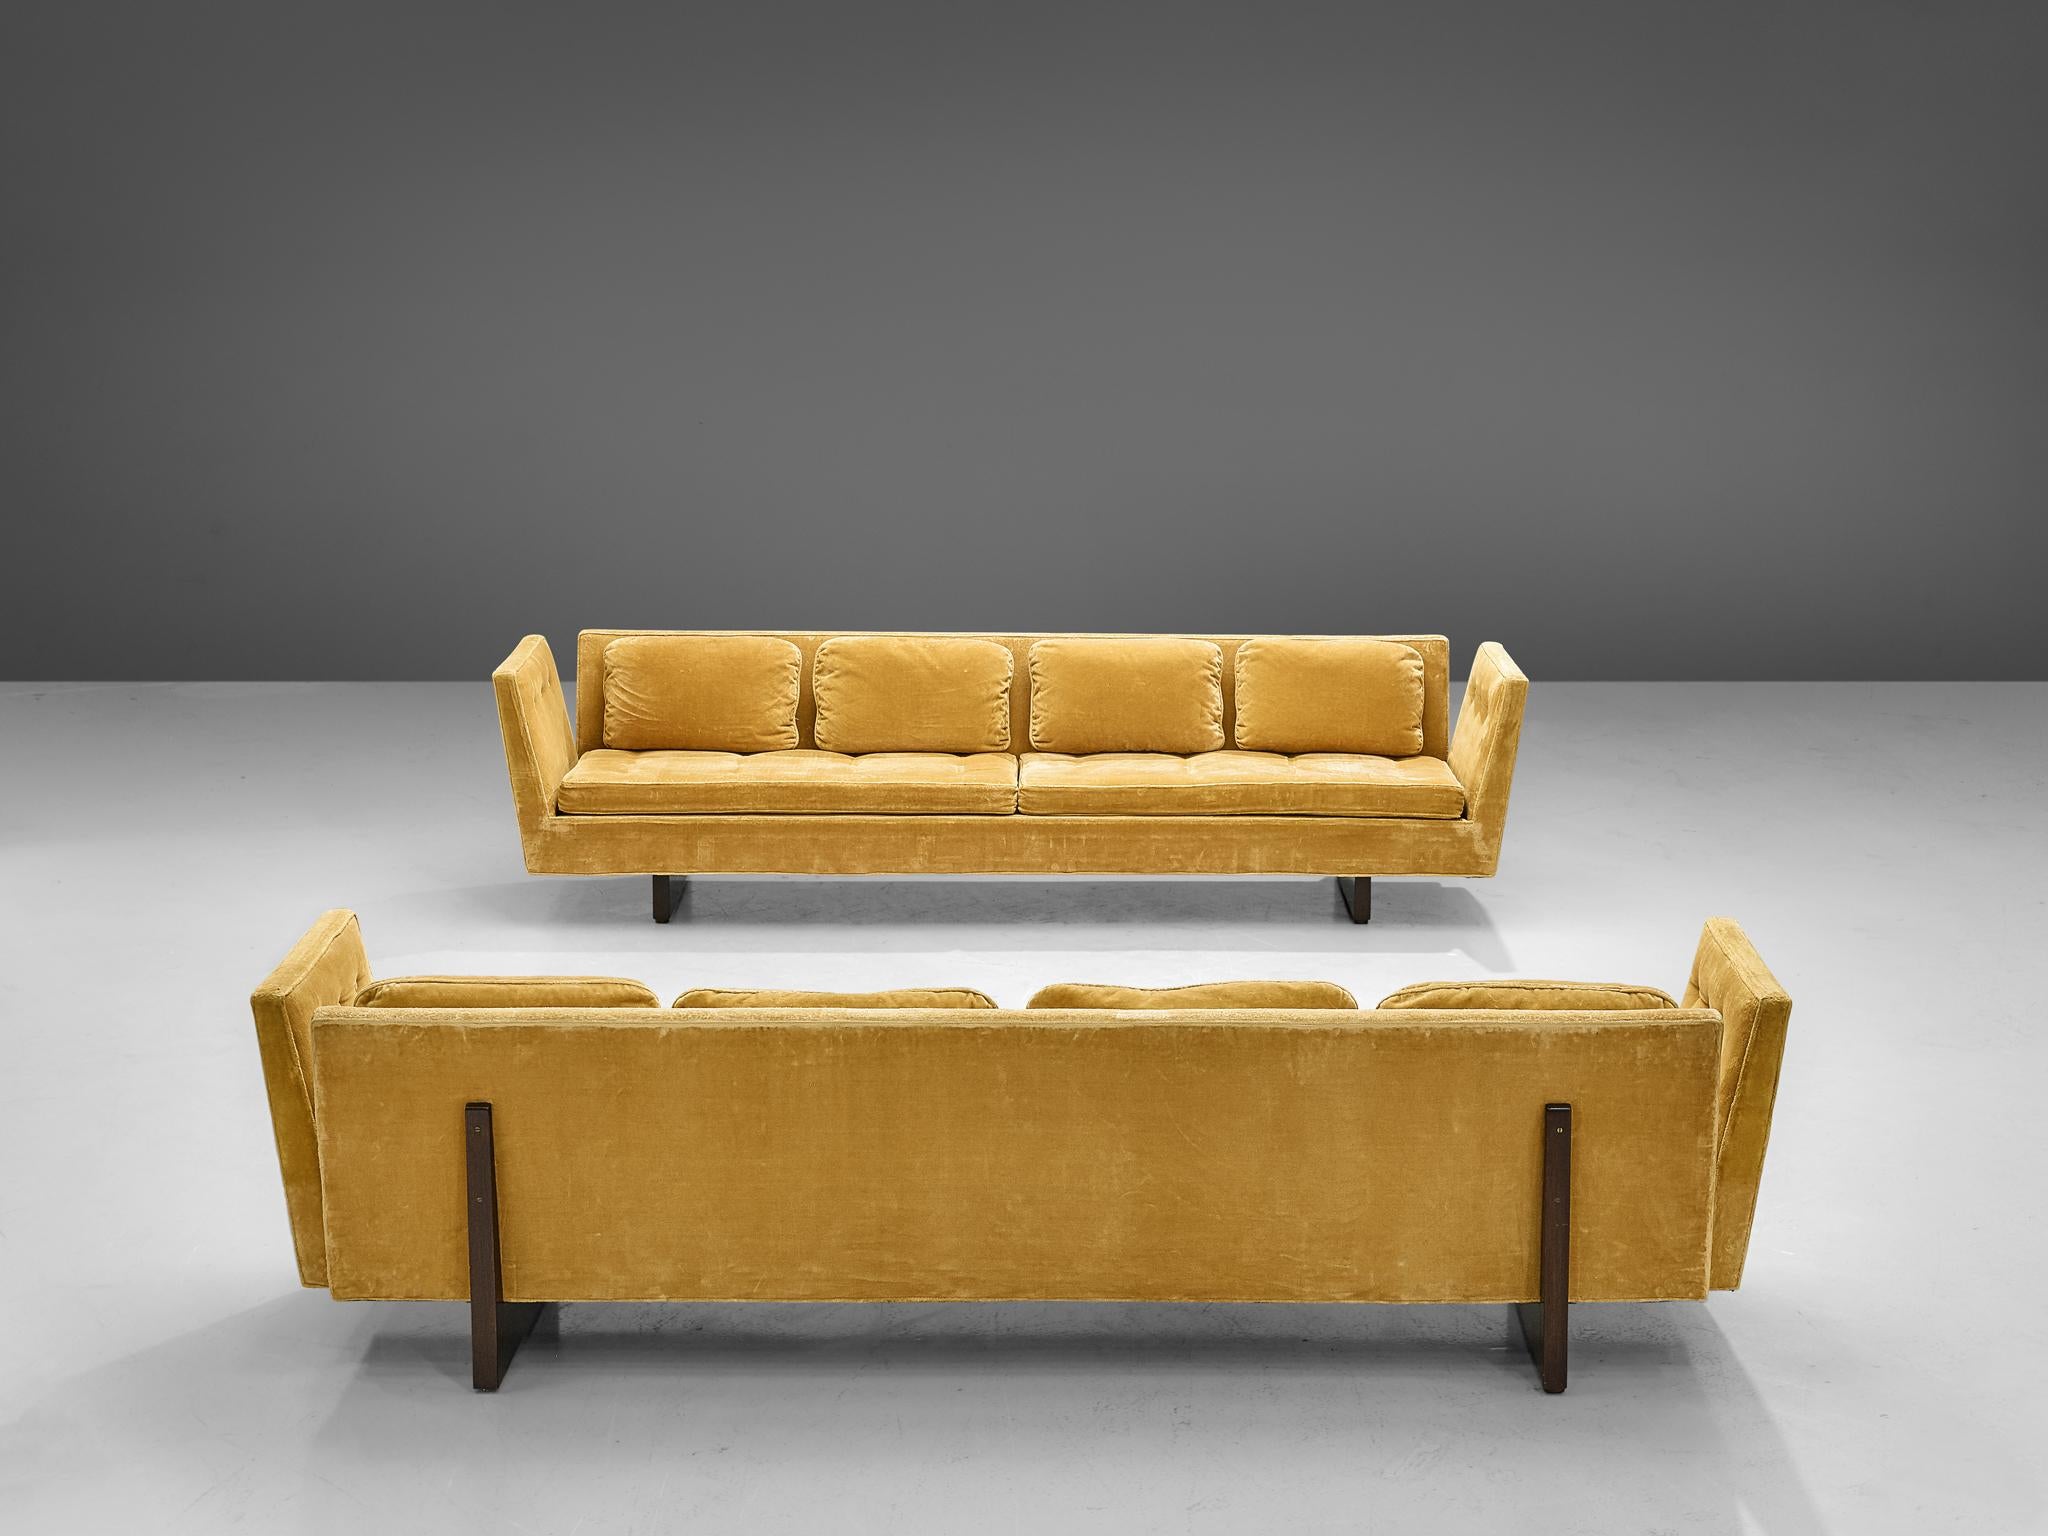 Edward Wormley for Dunbar, pair of split-arm sofas, wood, velvet upholstery, United States, 1960s

Edward Wormley designed this large pair of sofas for Dunbar in the 1960s. Characterized is the design by the outwards inclined armrests which add a